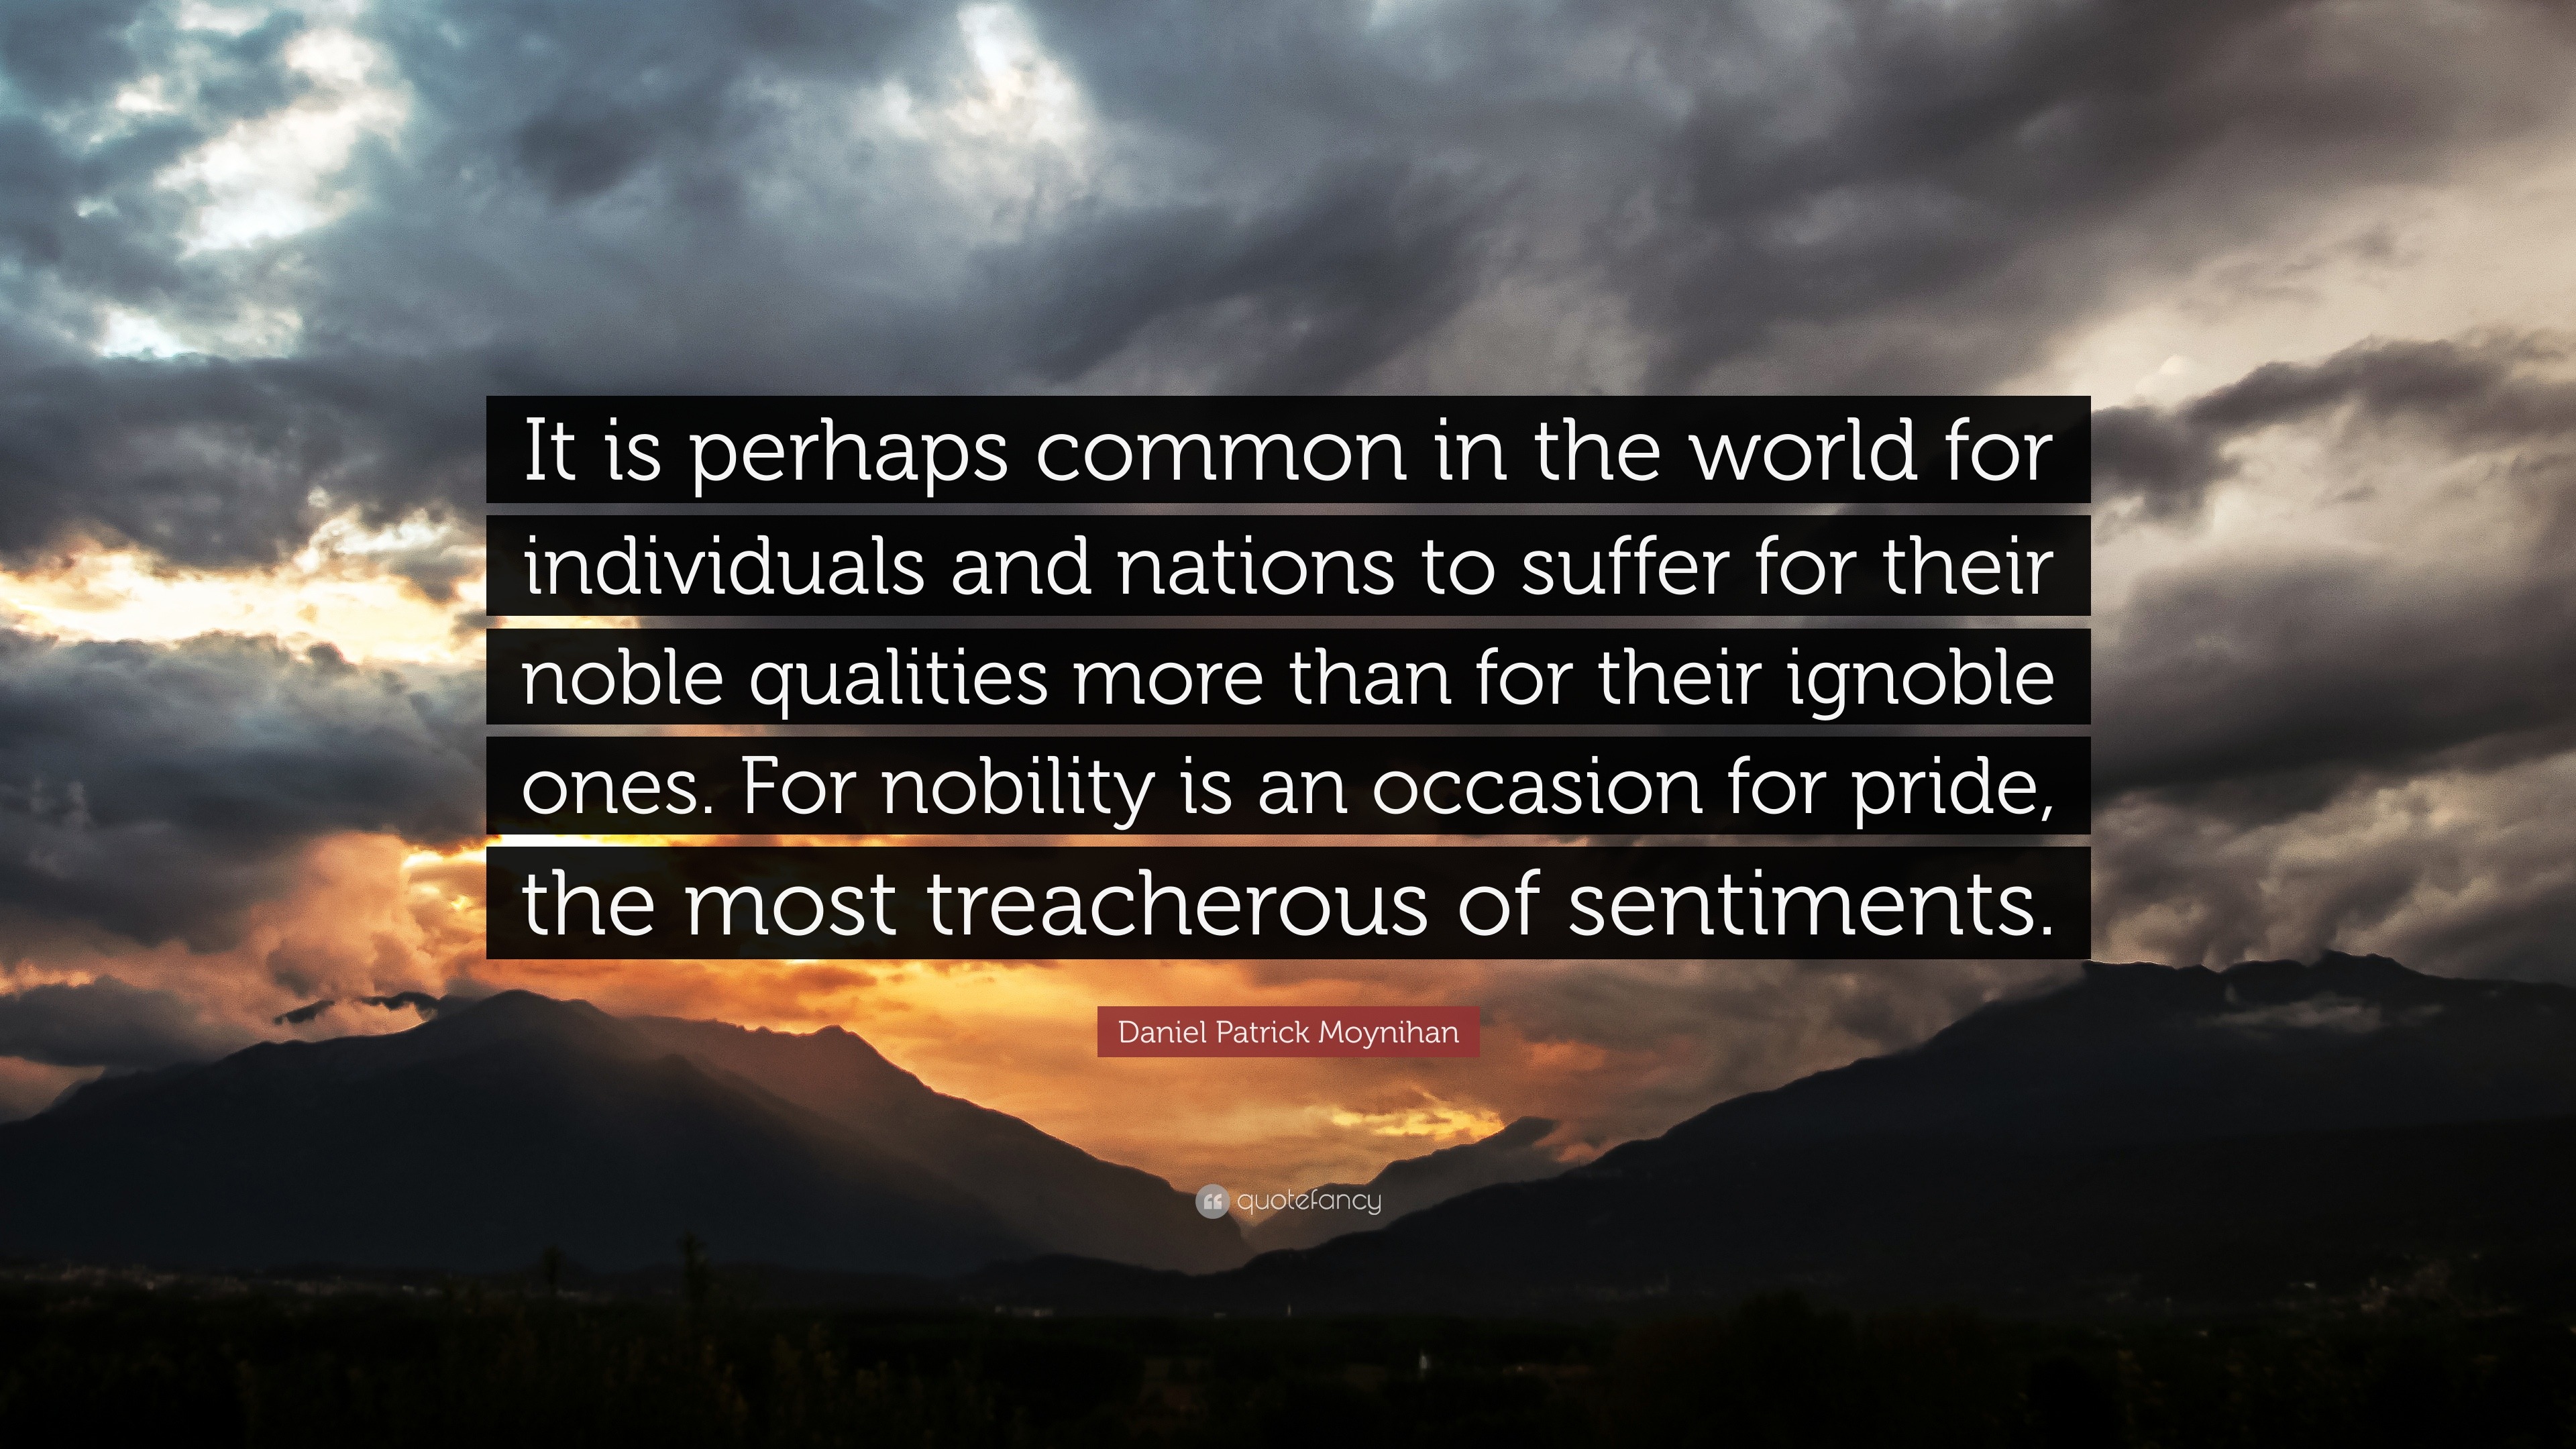 Daniel Patrick Moynihan Quote: “It is perhaps common in the world for ...